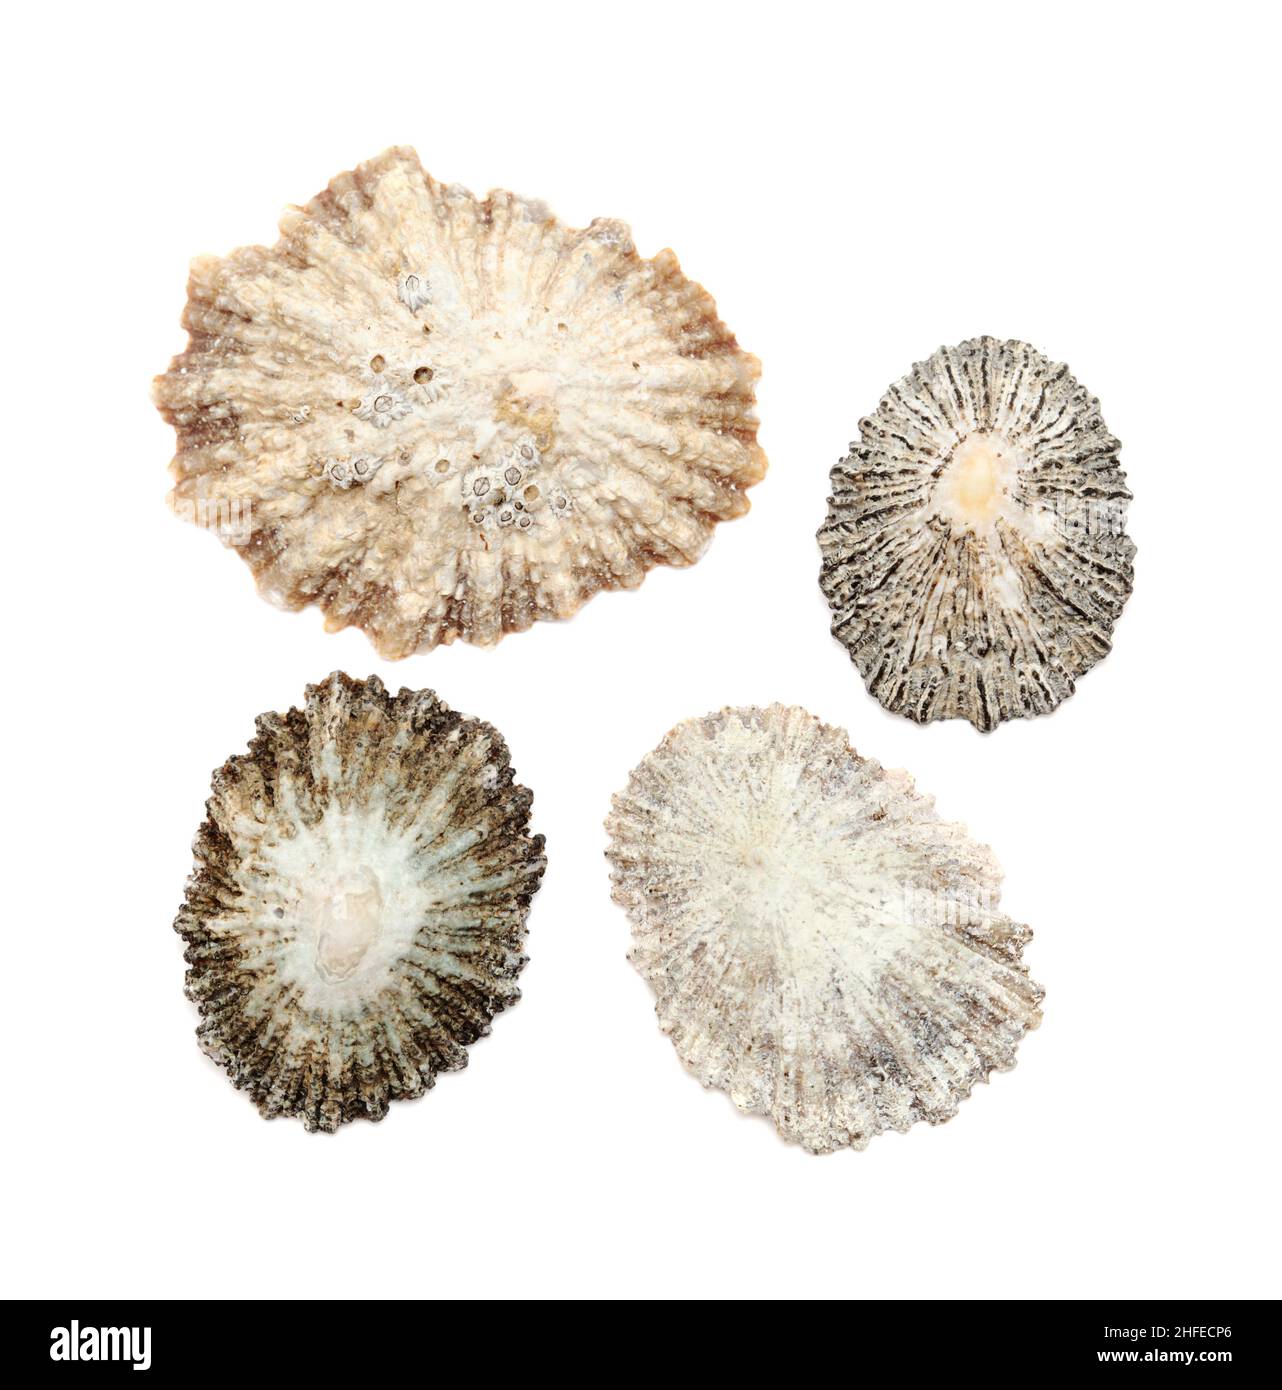 Limpet shells found on beaches of Gran Canaria, isolated on white background Stock Photo